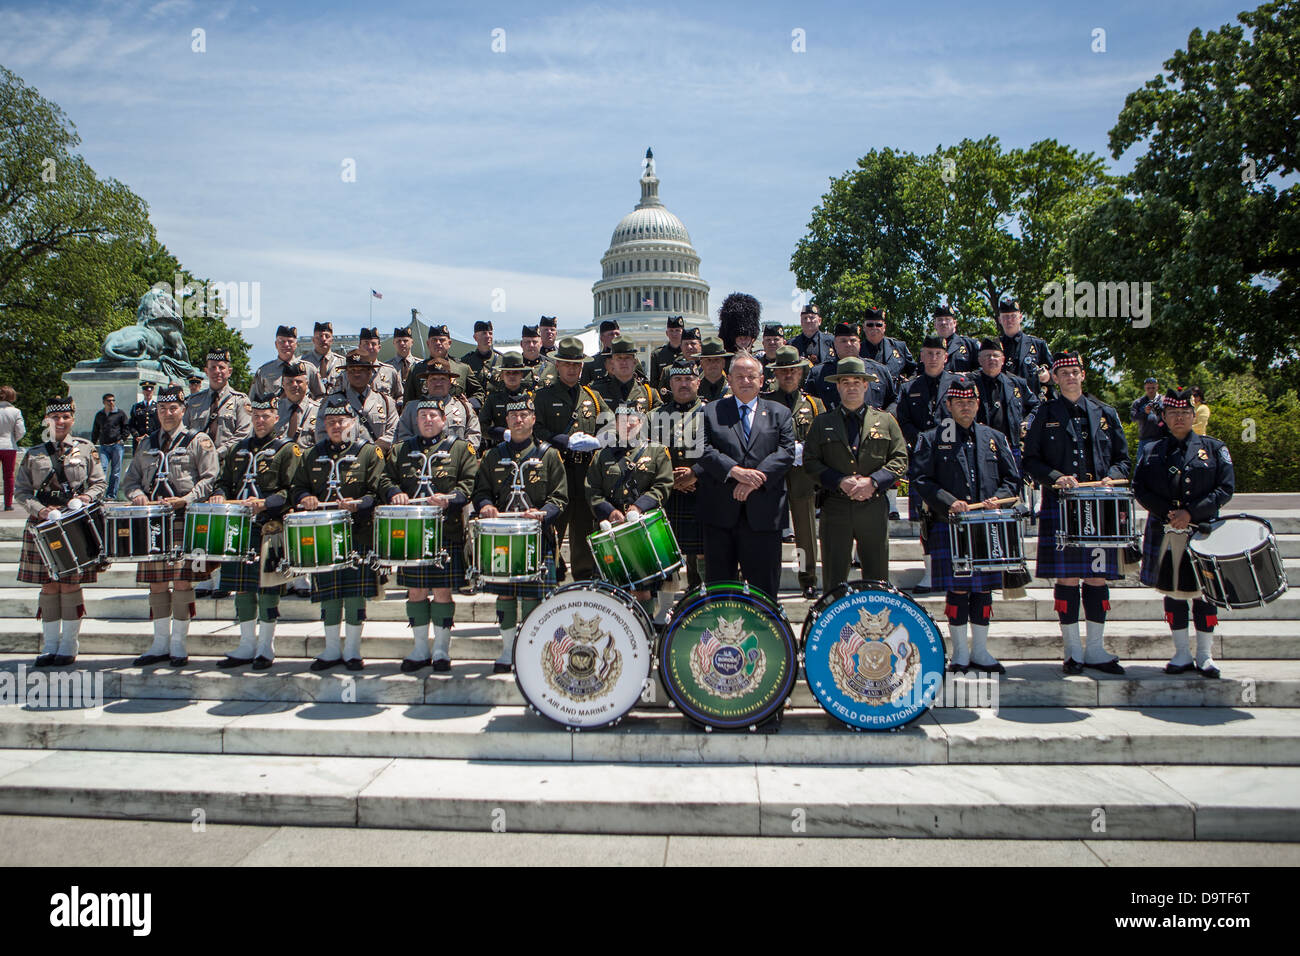 BP, OAM, and OFO Pipe & Drum. Stock Photo